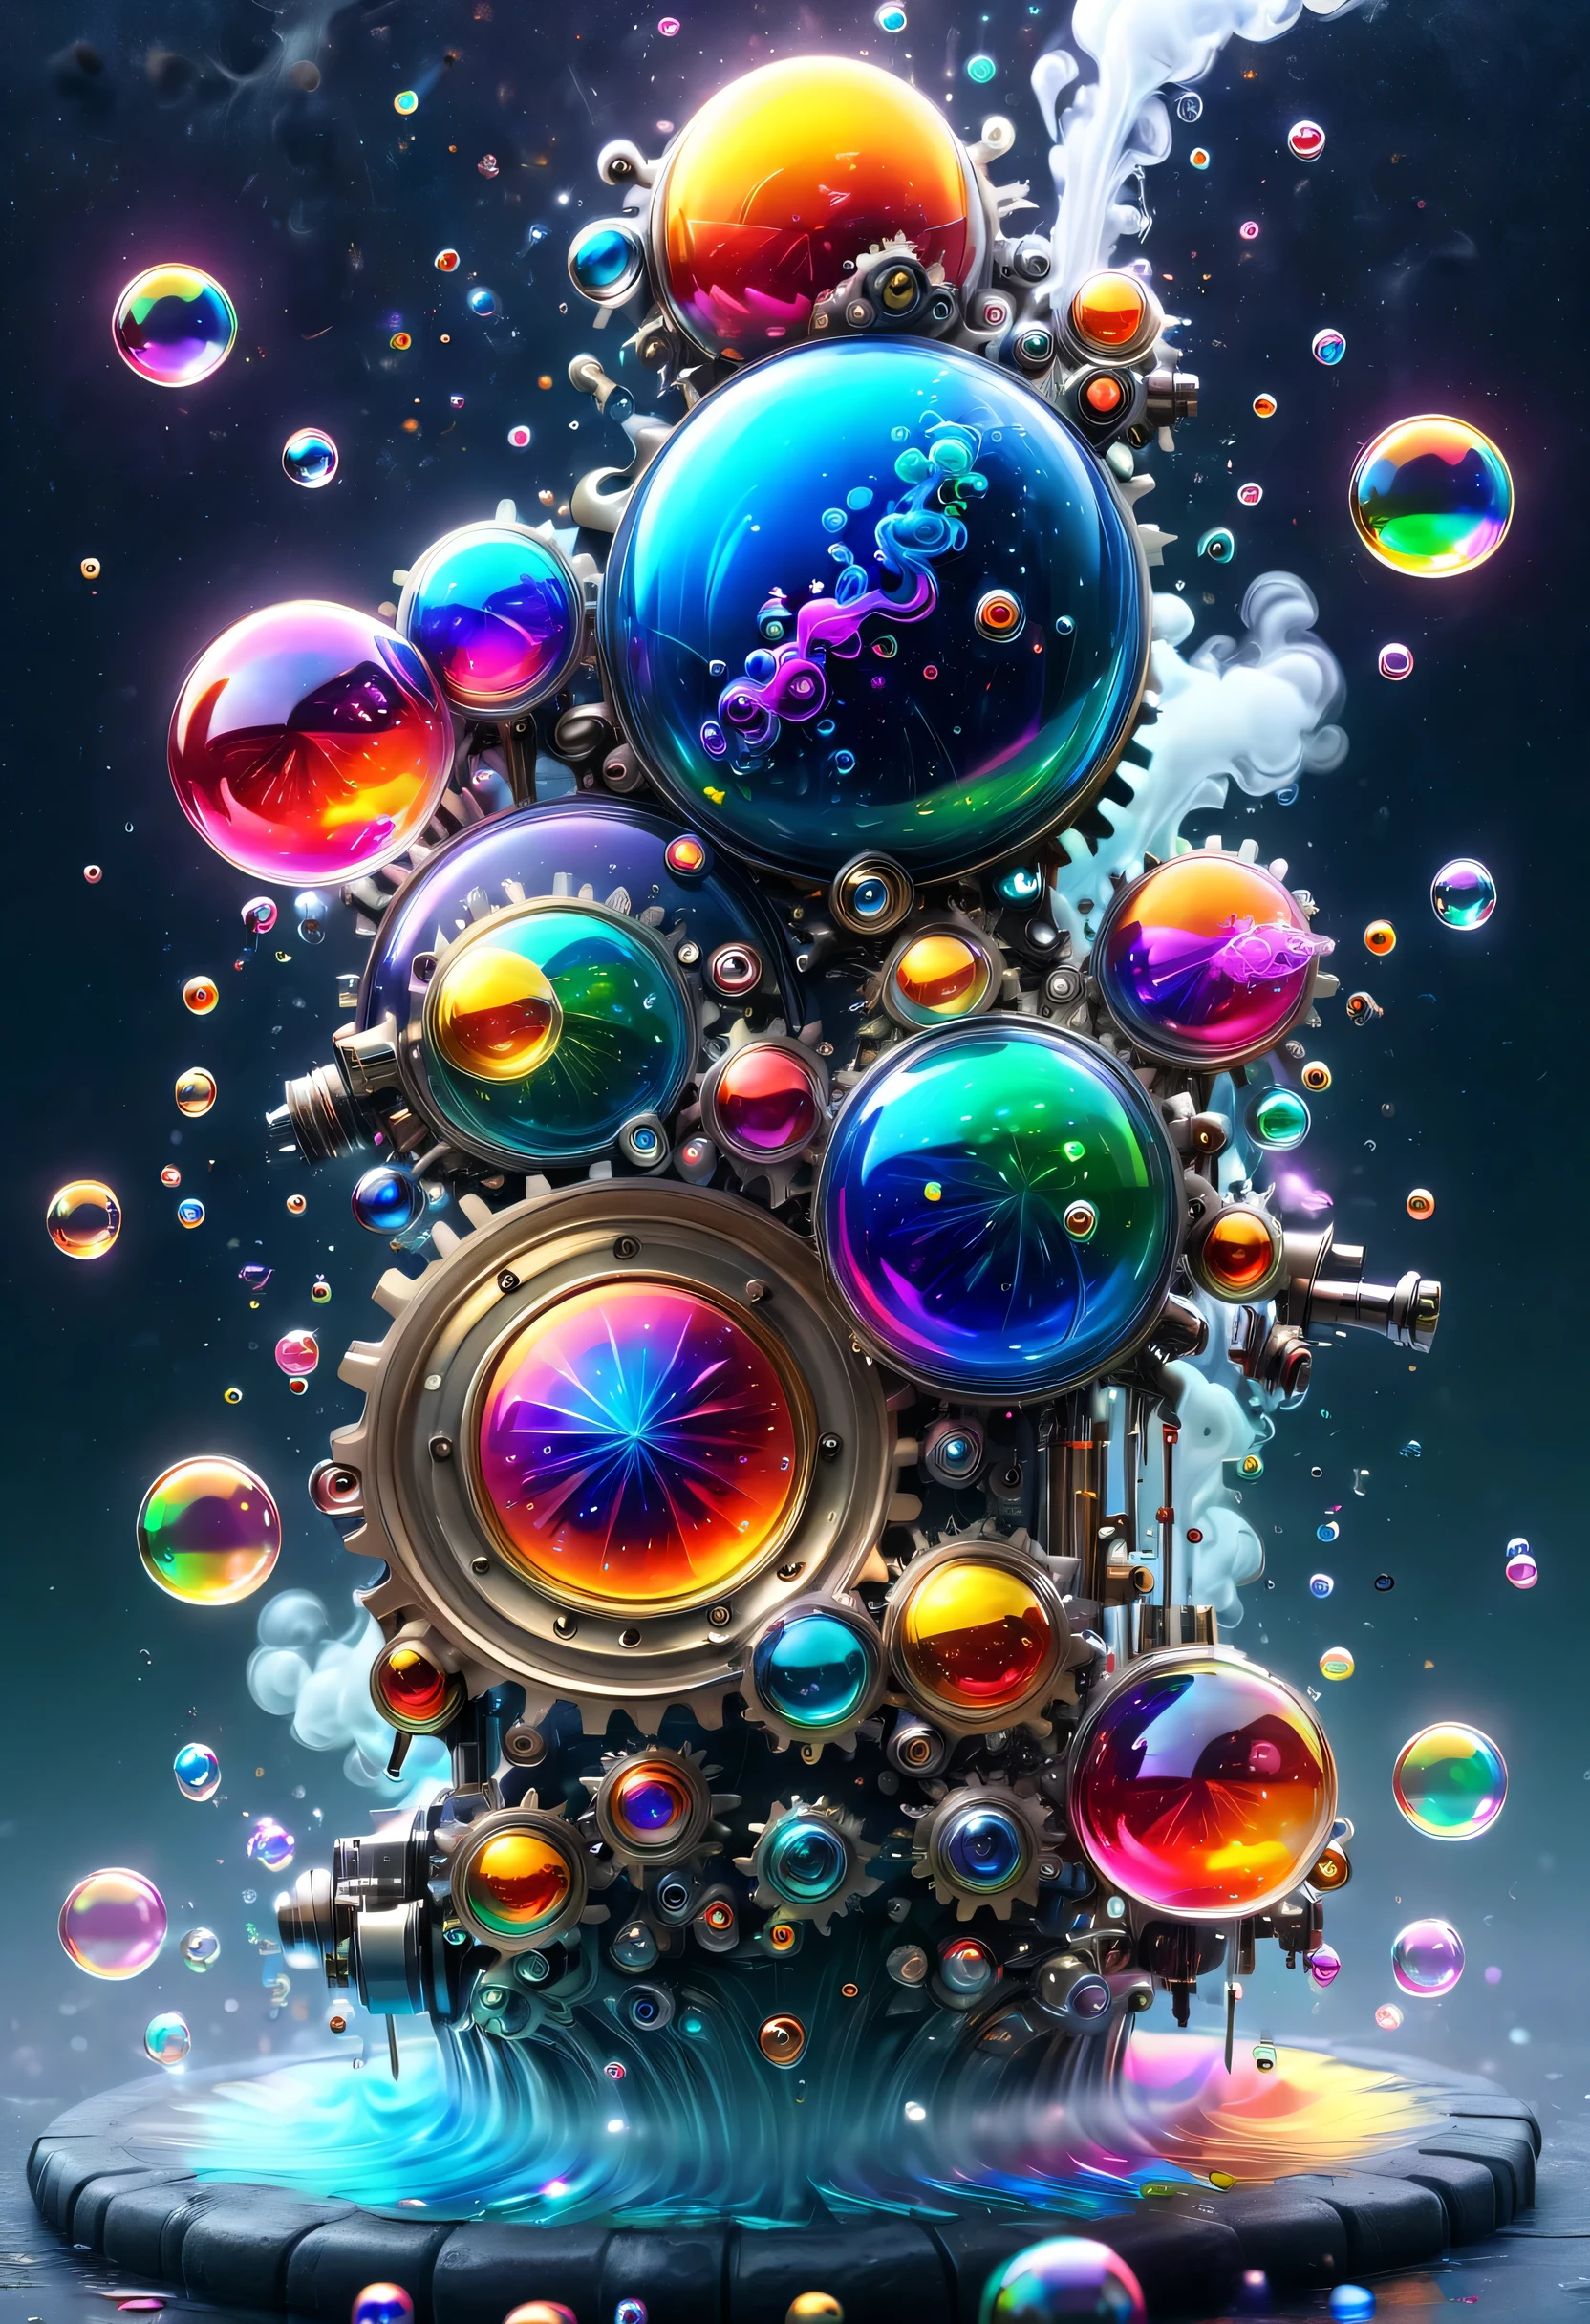 
(best quality,4K,8k,high resolution,masterpiece:1.2),Super detailed,(actual,photoactual,photo-actual:1.37),stringy viscous liquid,Mechanical gears,gradient neon light,(floating colorful bubbles,starry sky steam,starry sky steam:1.37,starry sky steam:1.37,starry sky steam:1.37),(Laser colorful light waves),(Metal refraction),many liquid bubbles:1.37,Gorgeous gradient geometric art,The collision and reorganization of future and retro elements,Exaggerated artistic expression,concept art,Red,green,blue 